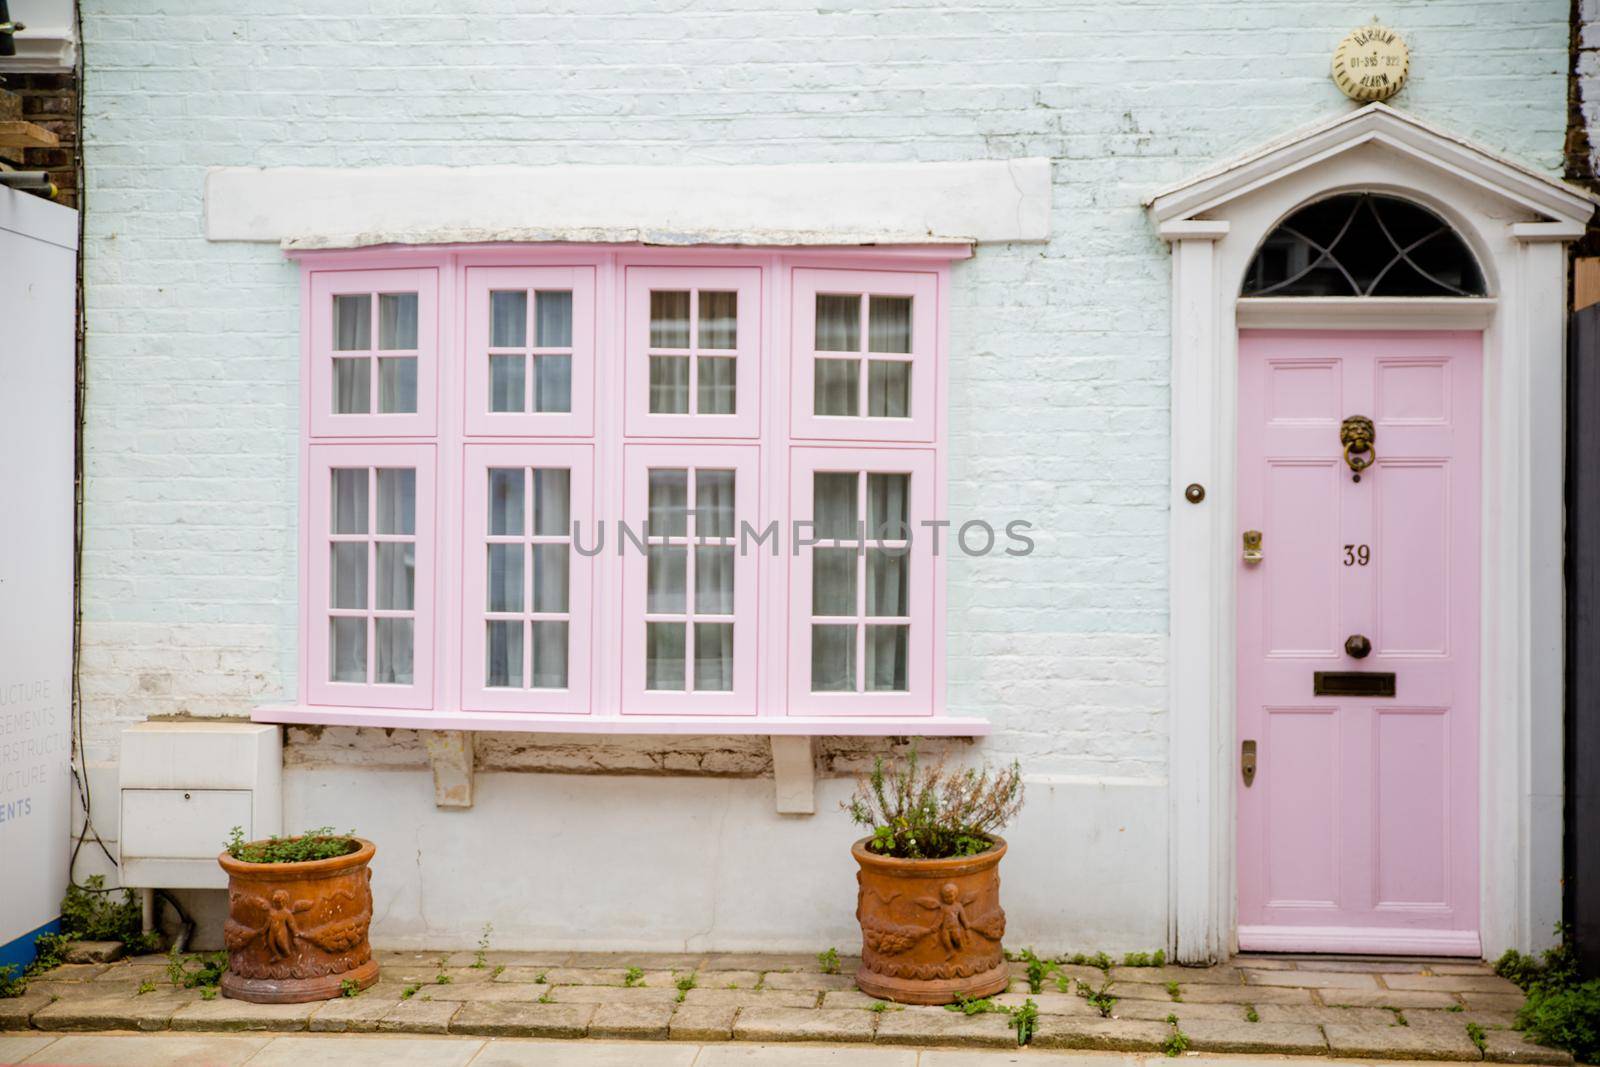 Front side of white and pink British house with empty pots under the window. Beautiful pastel color English house with Victorian architecture. Colorful London neighborhood